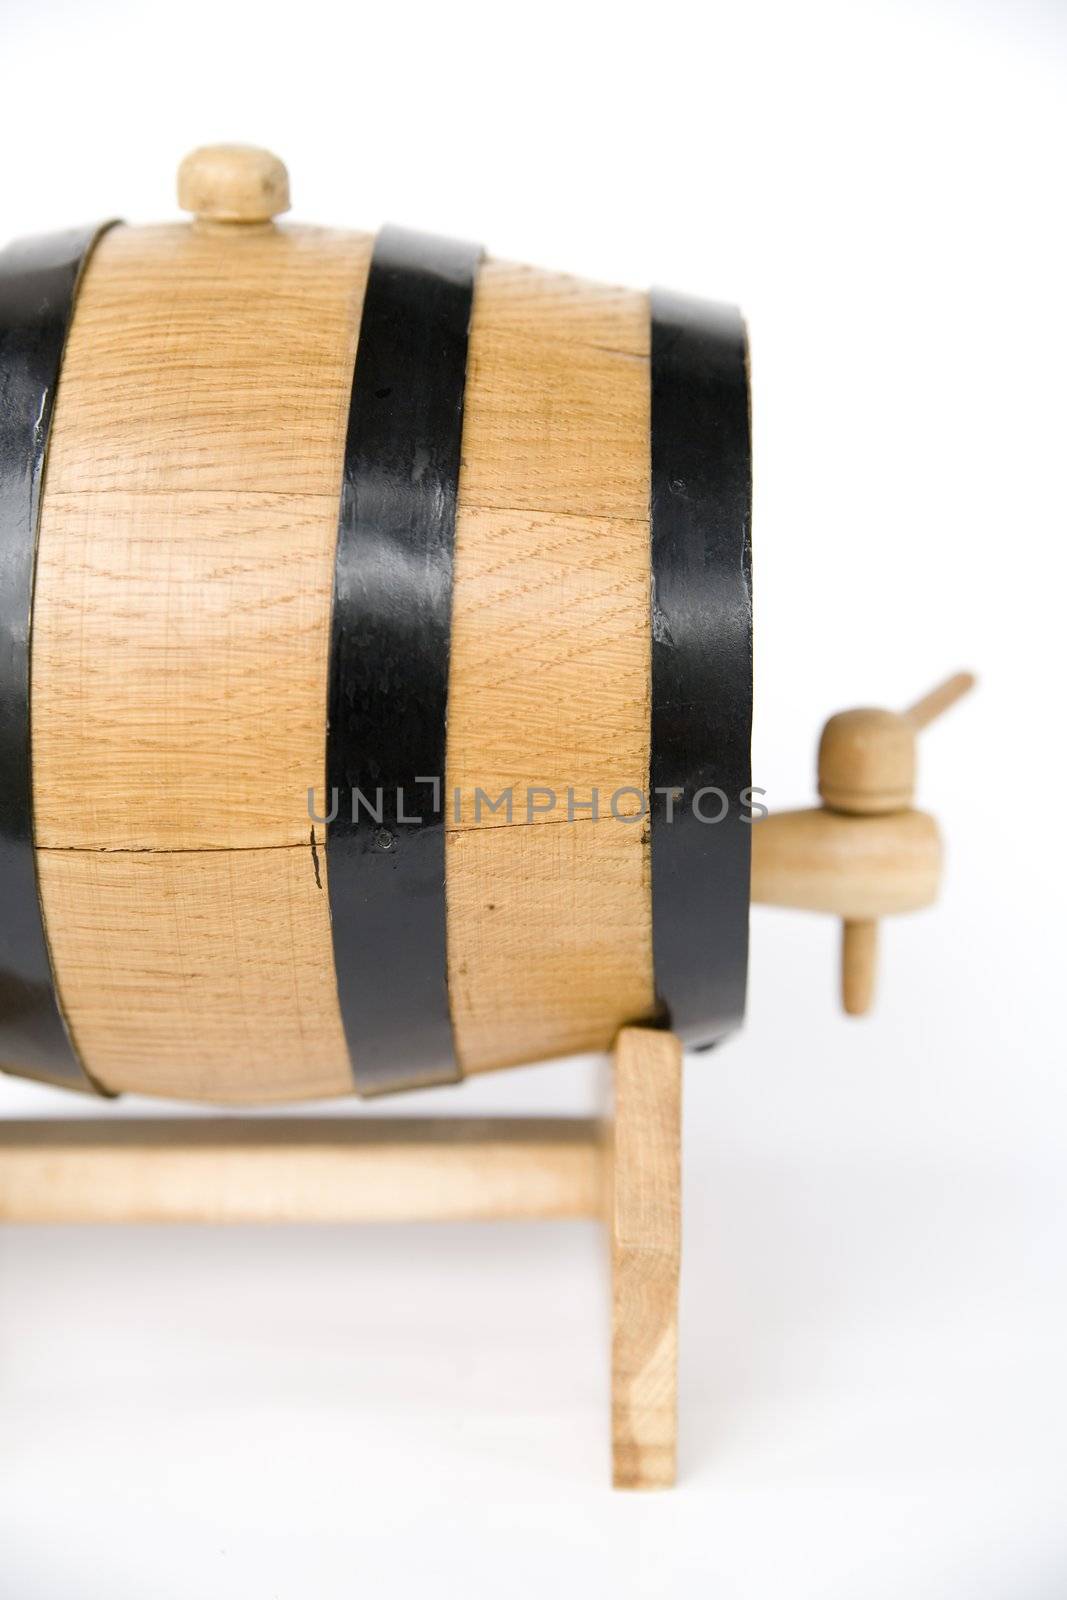 a small barrel with beer inside by furzyk73